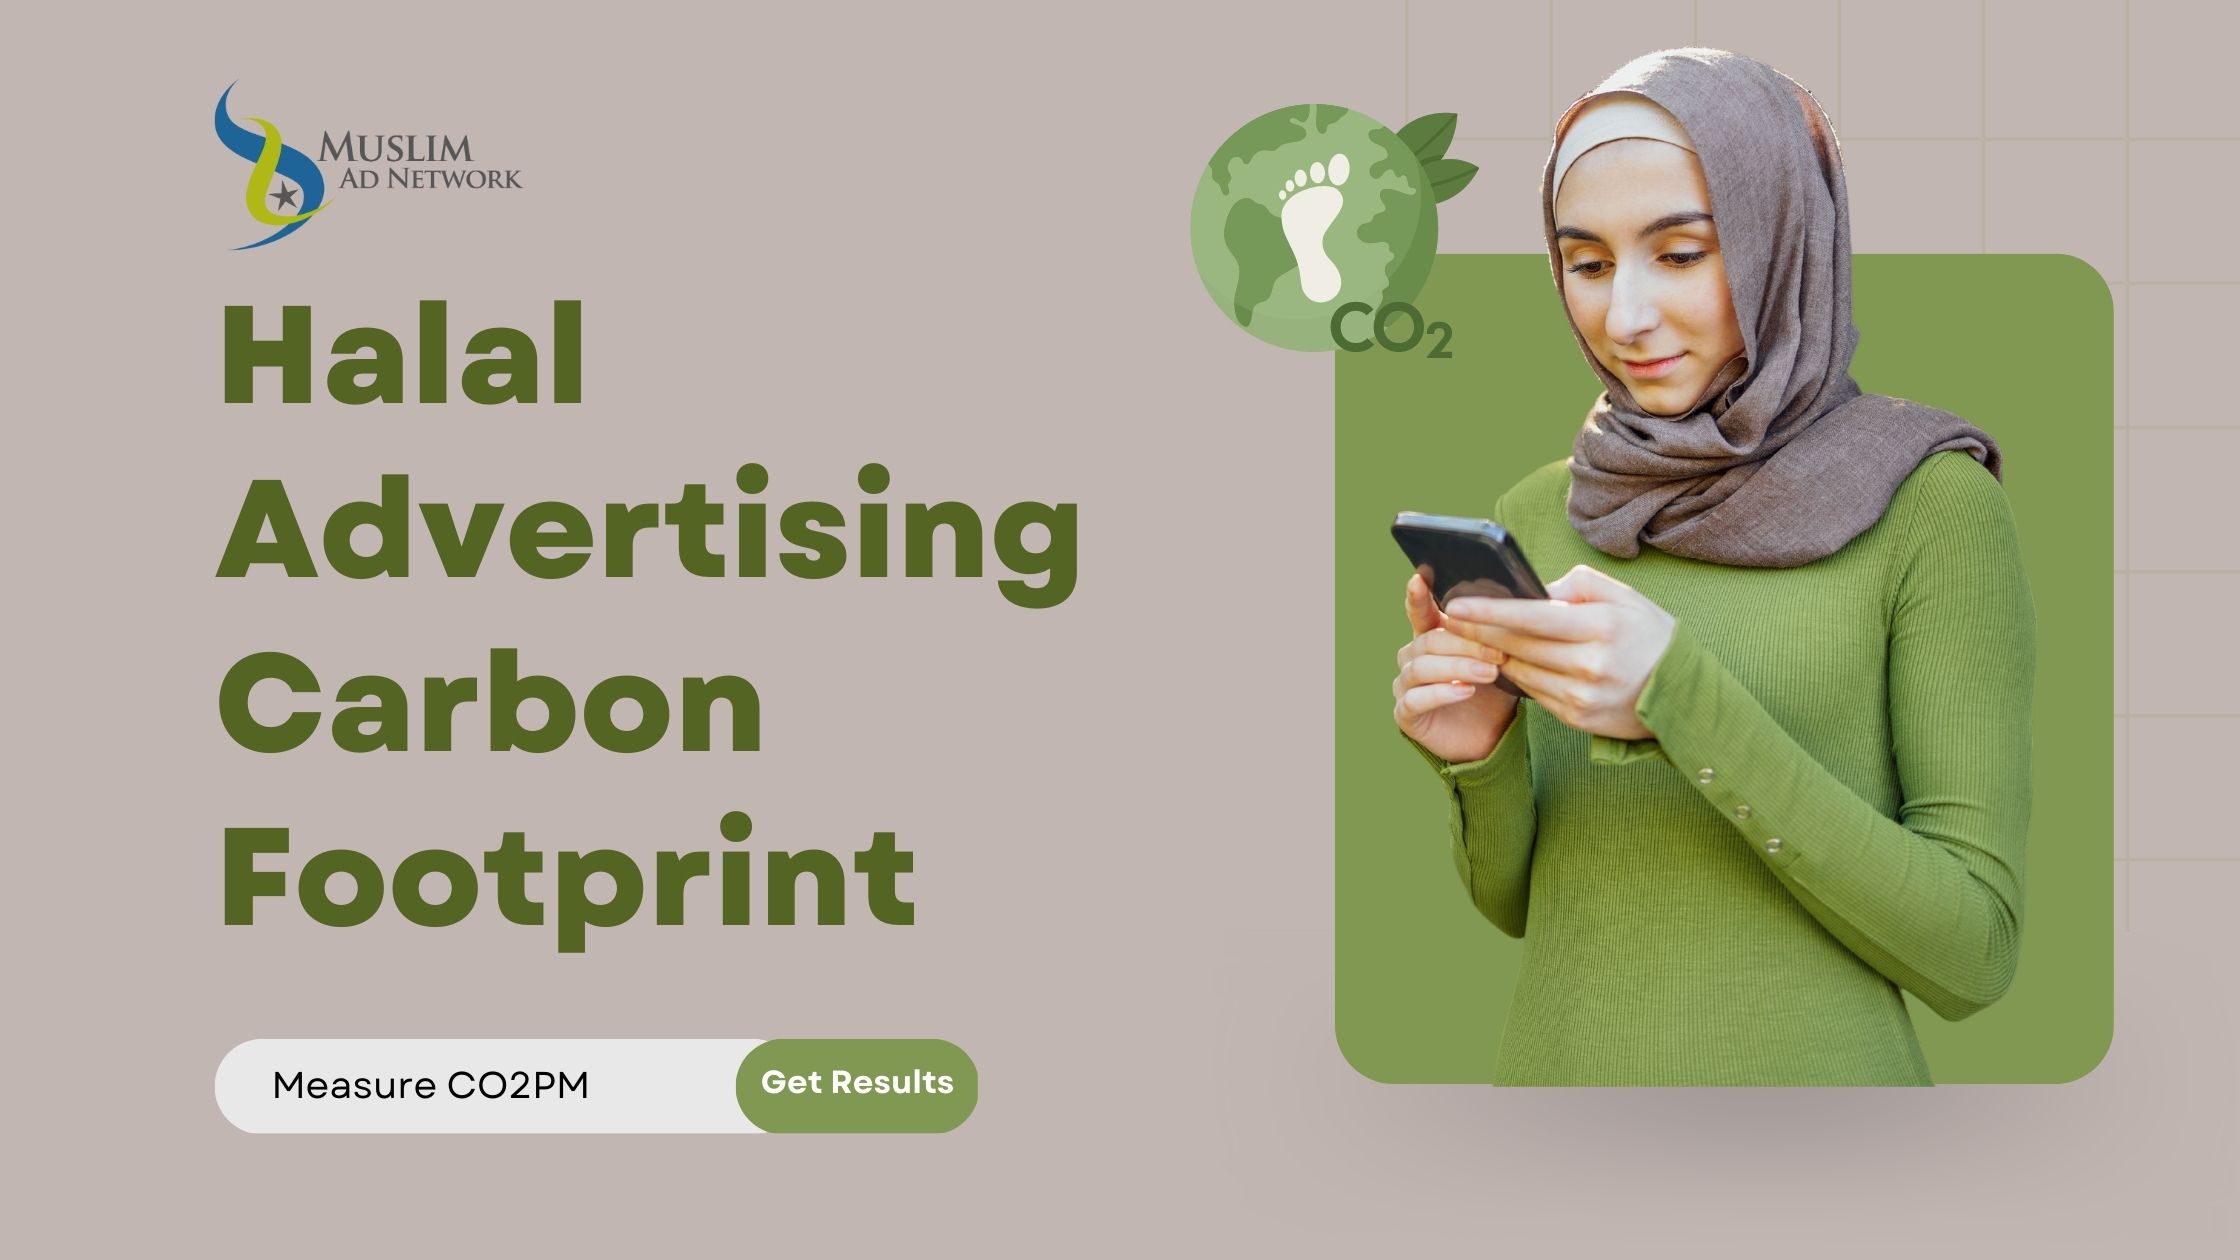 Why Your Halal Business Should Care About Digital Advertising Carbon Footprint